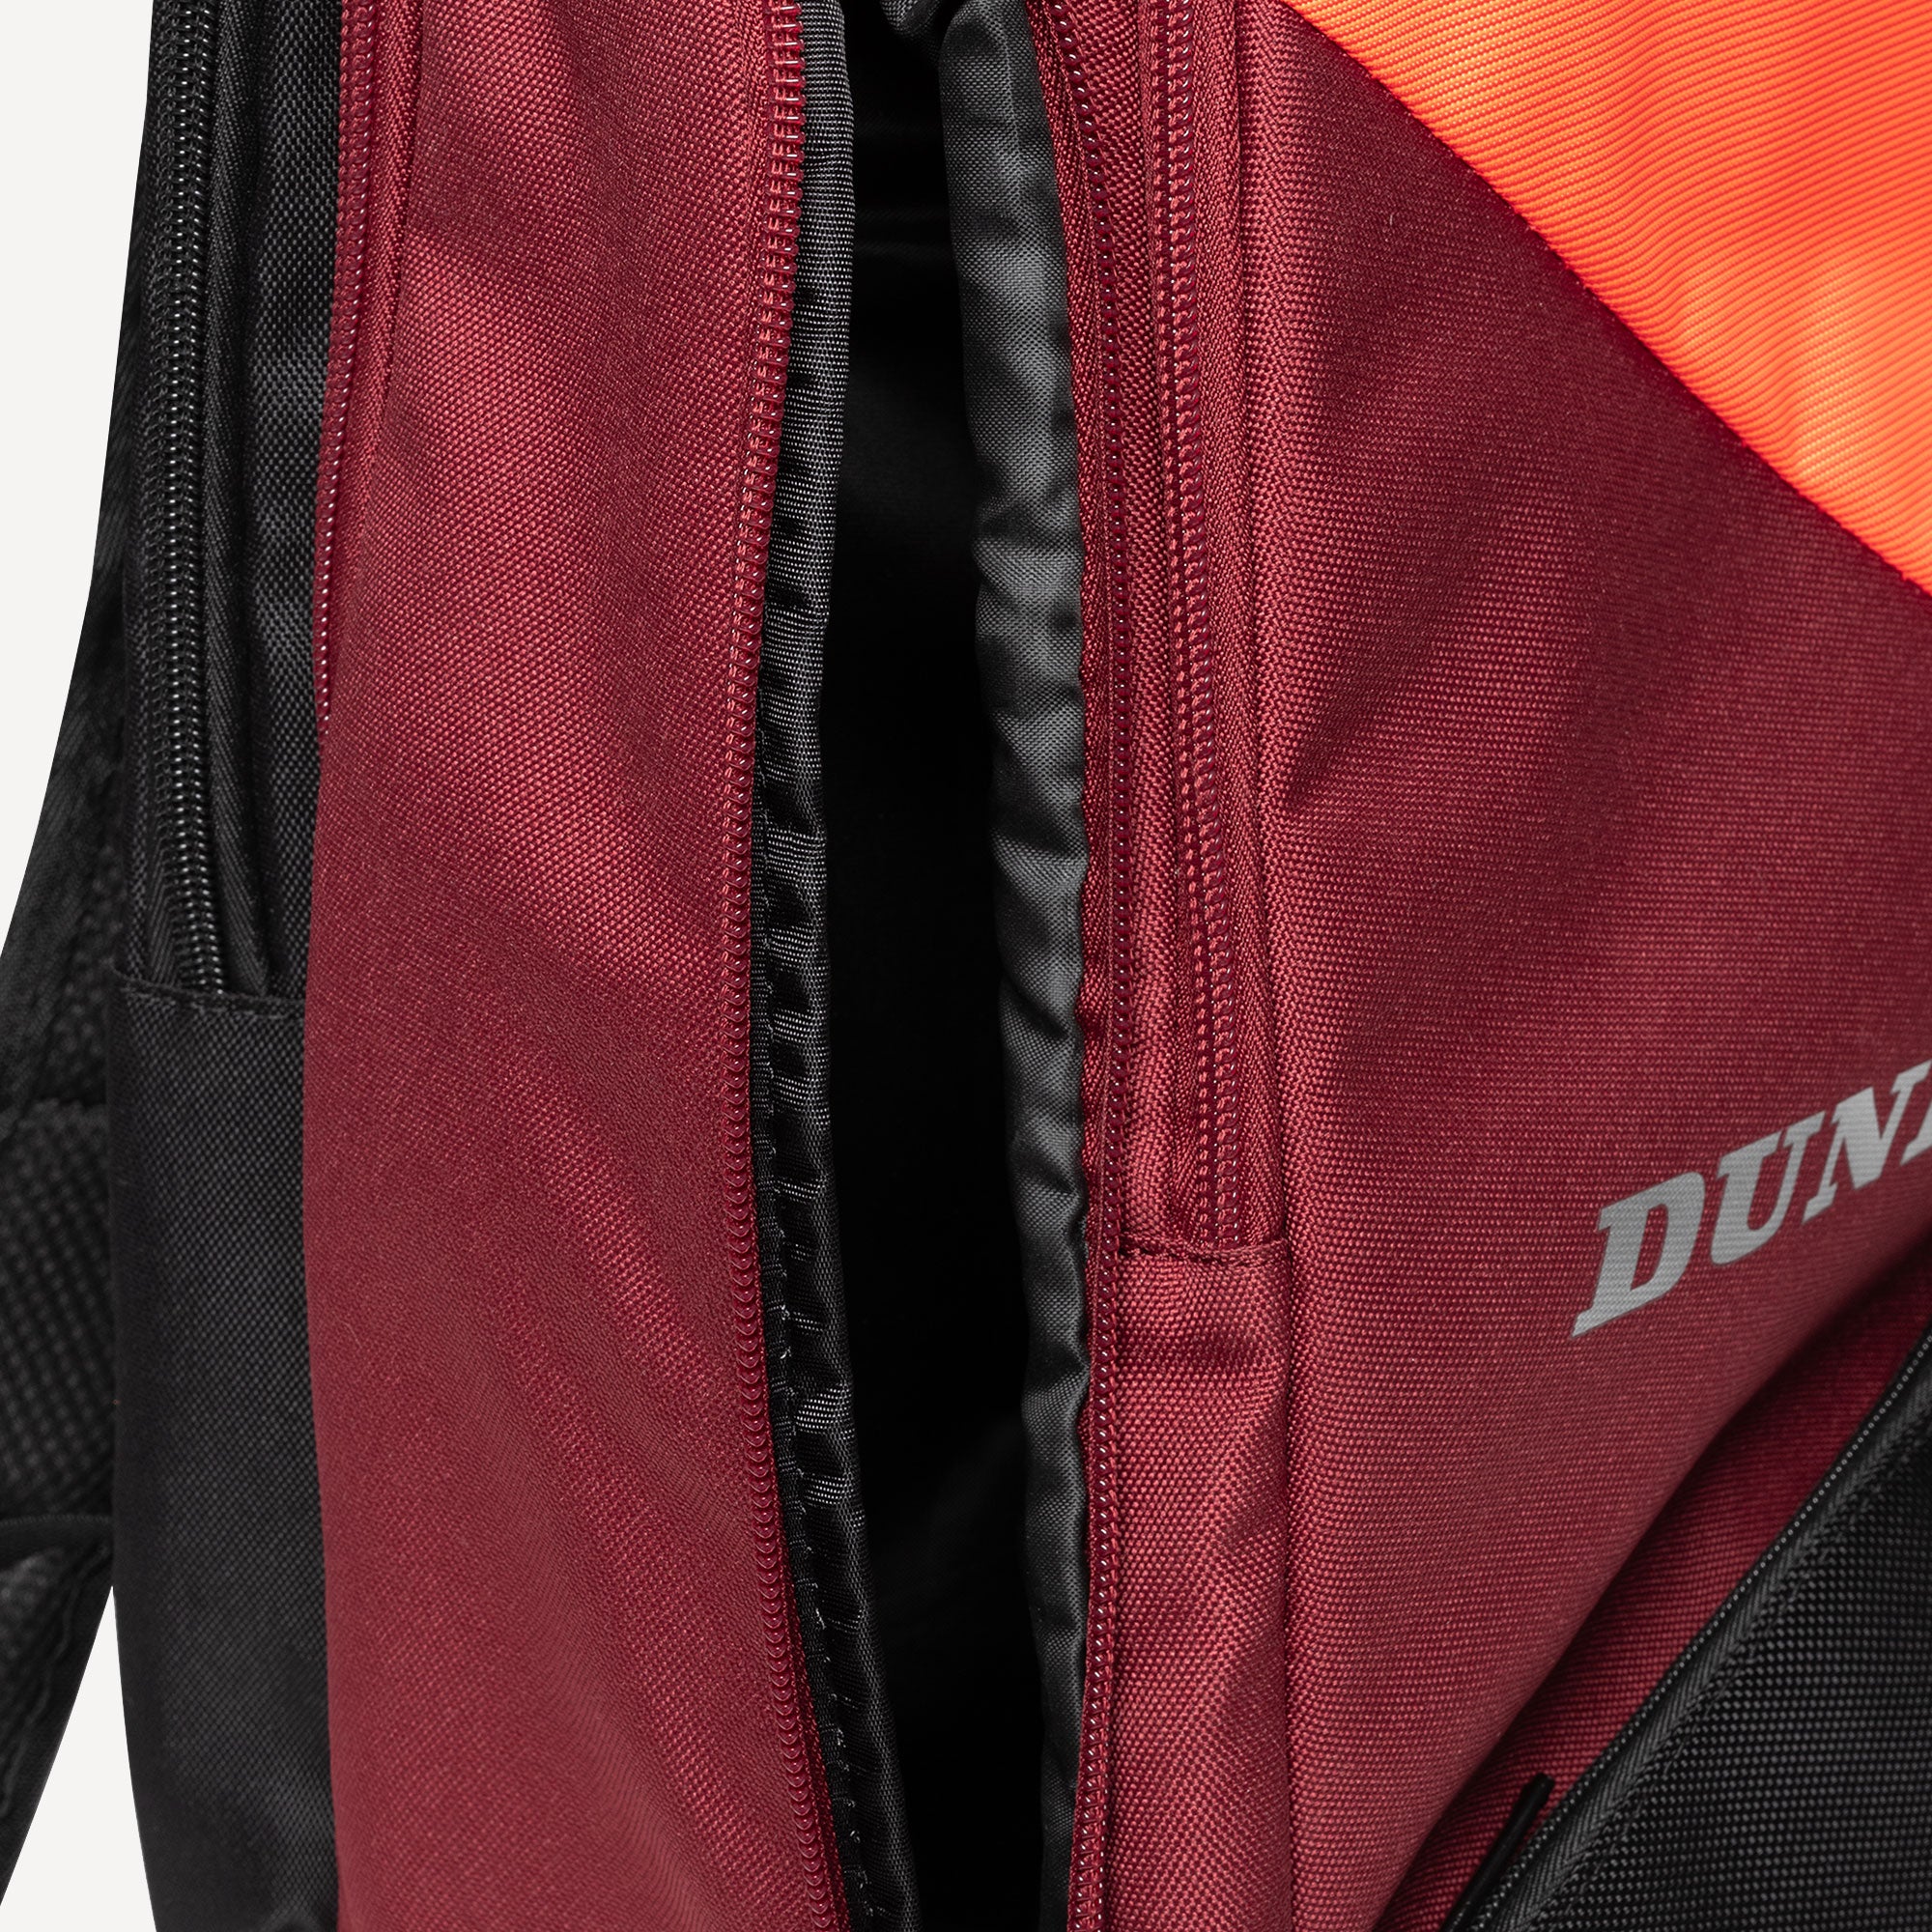 Dunlop CX Performance Tennis Backpack - Red (8)